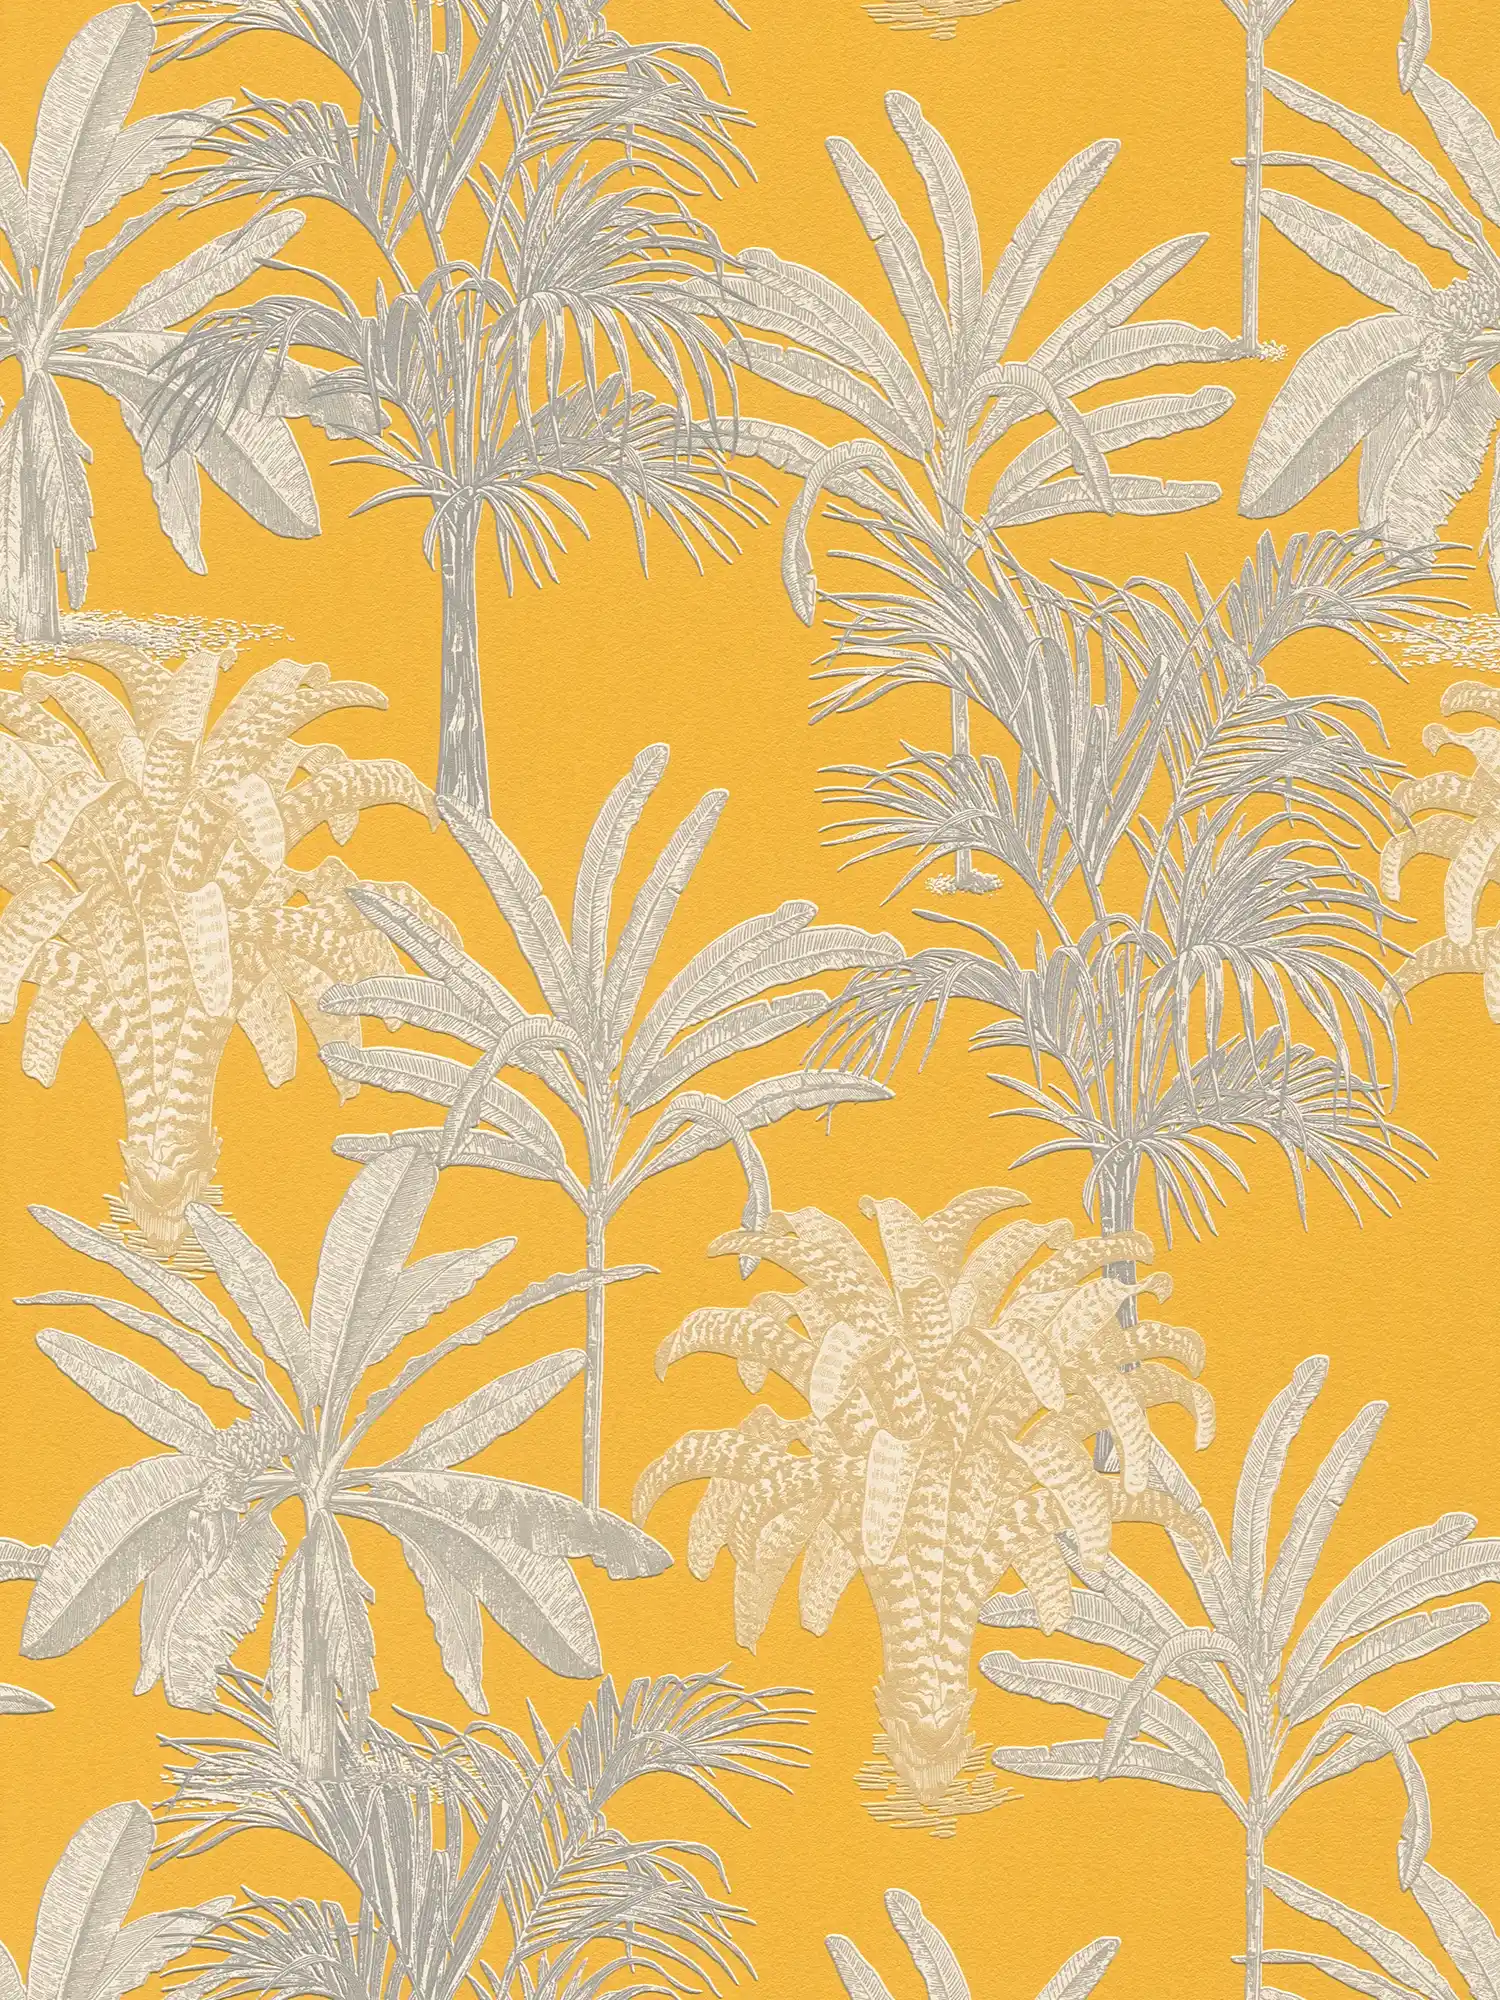 Palm wallpaper mustard yellow with textured pattern - yellow, grey
